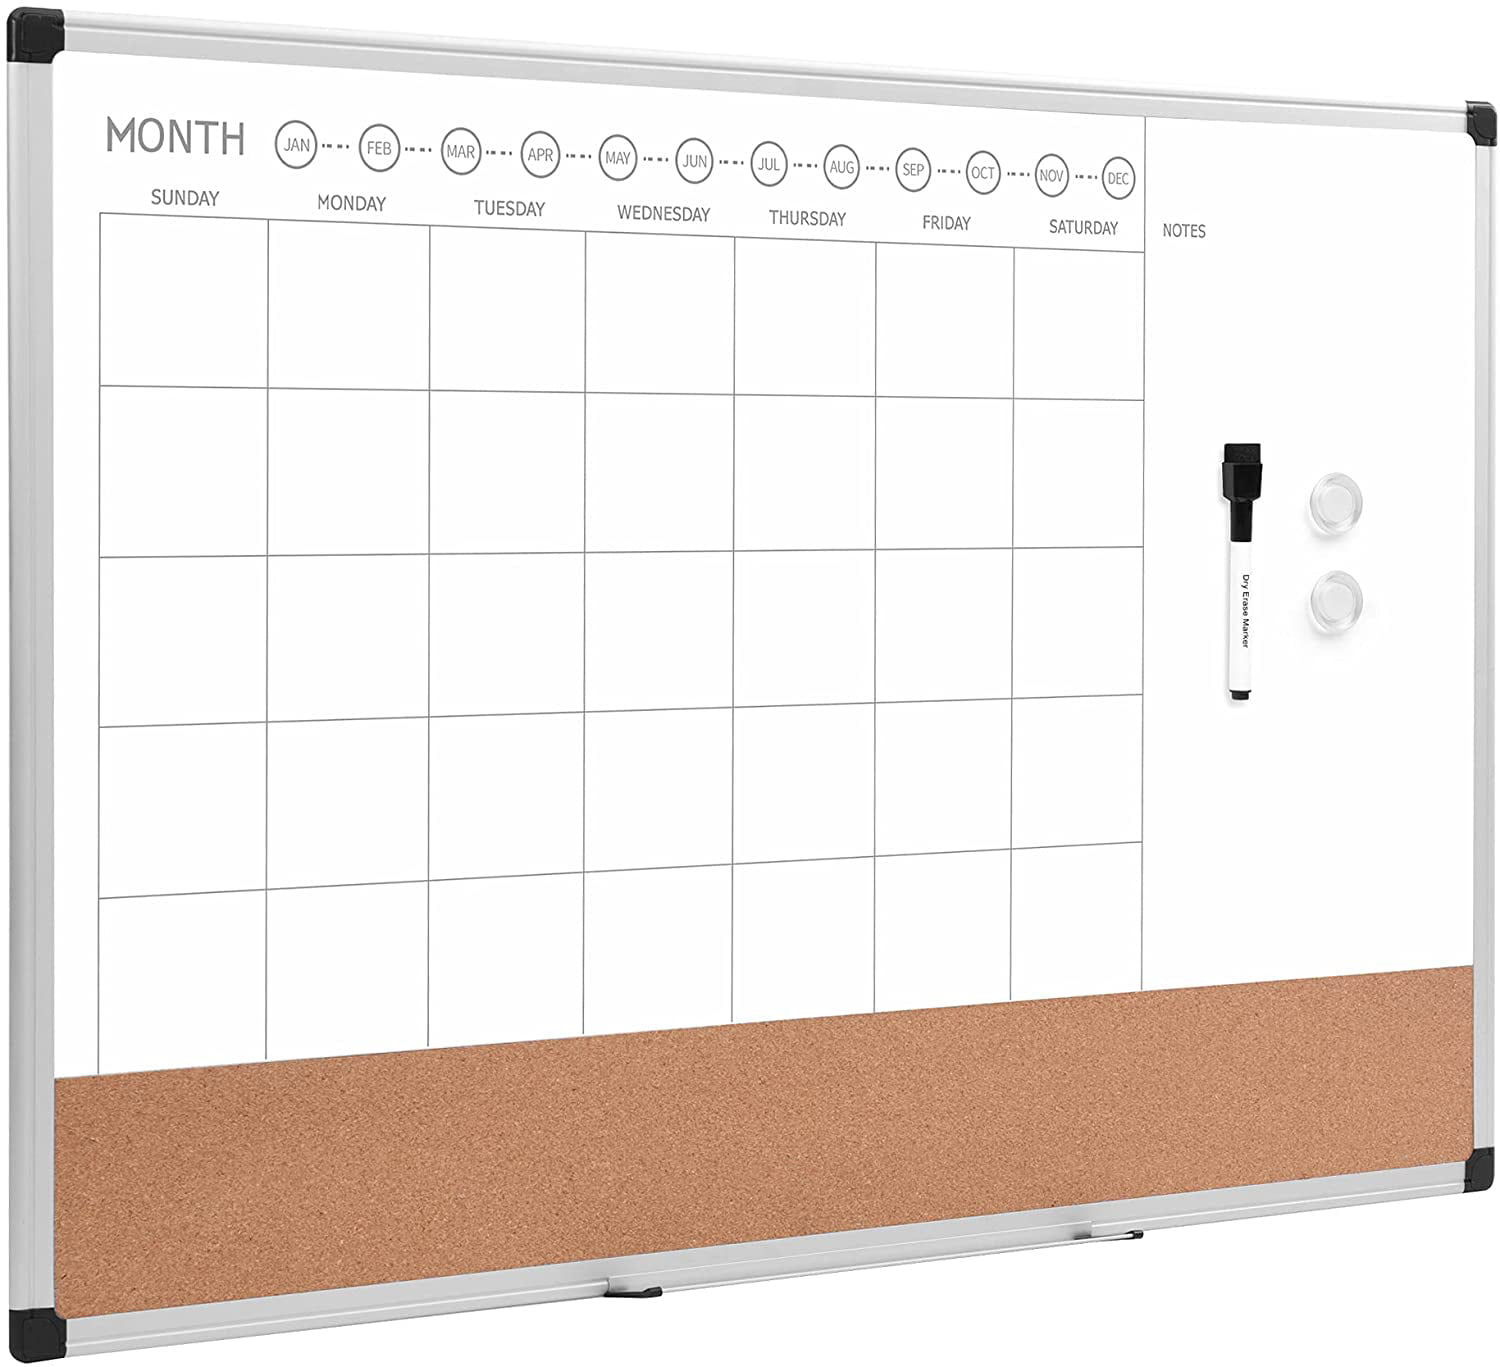 Oumilen Monthly Planner Plus Memo Board Dry Erase Calendar Board Acrylic, Magnetic with 6 Pens